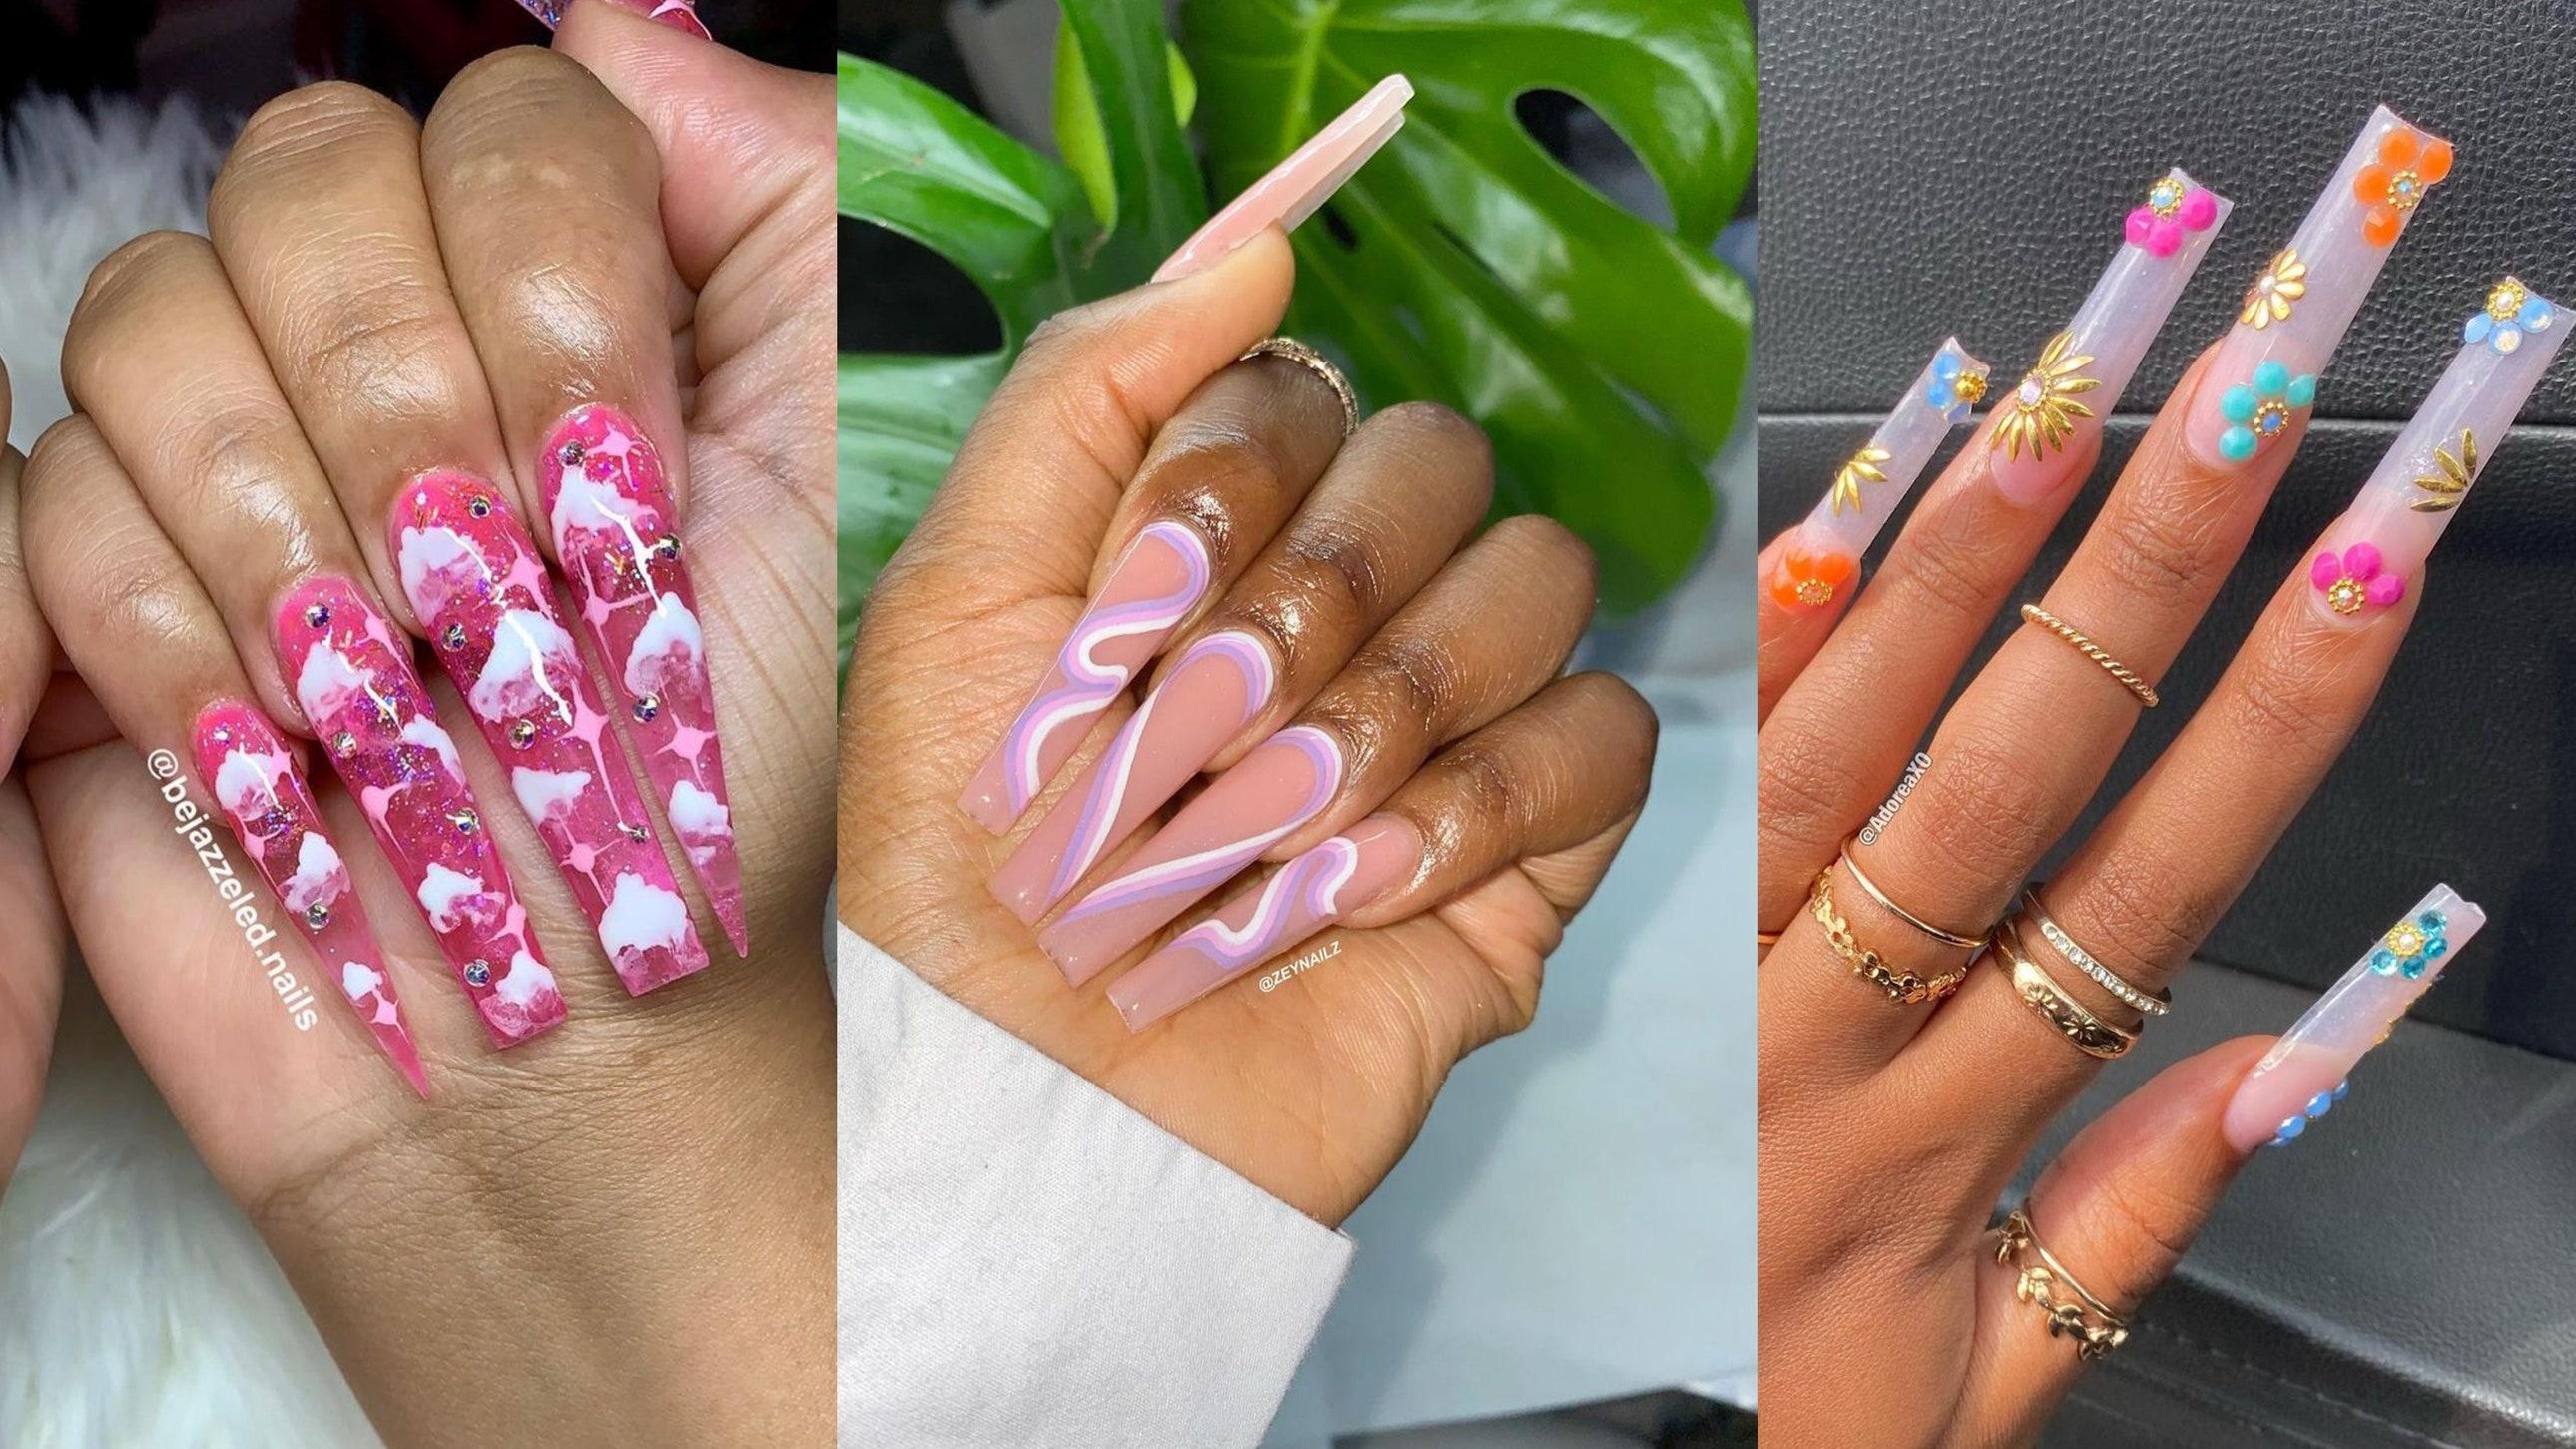 Acrylic Nails: A Guide to Getting Acrylic Nails